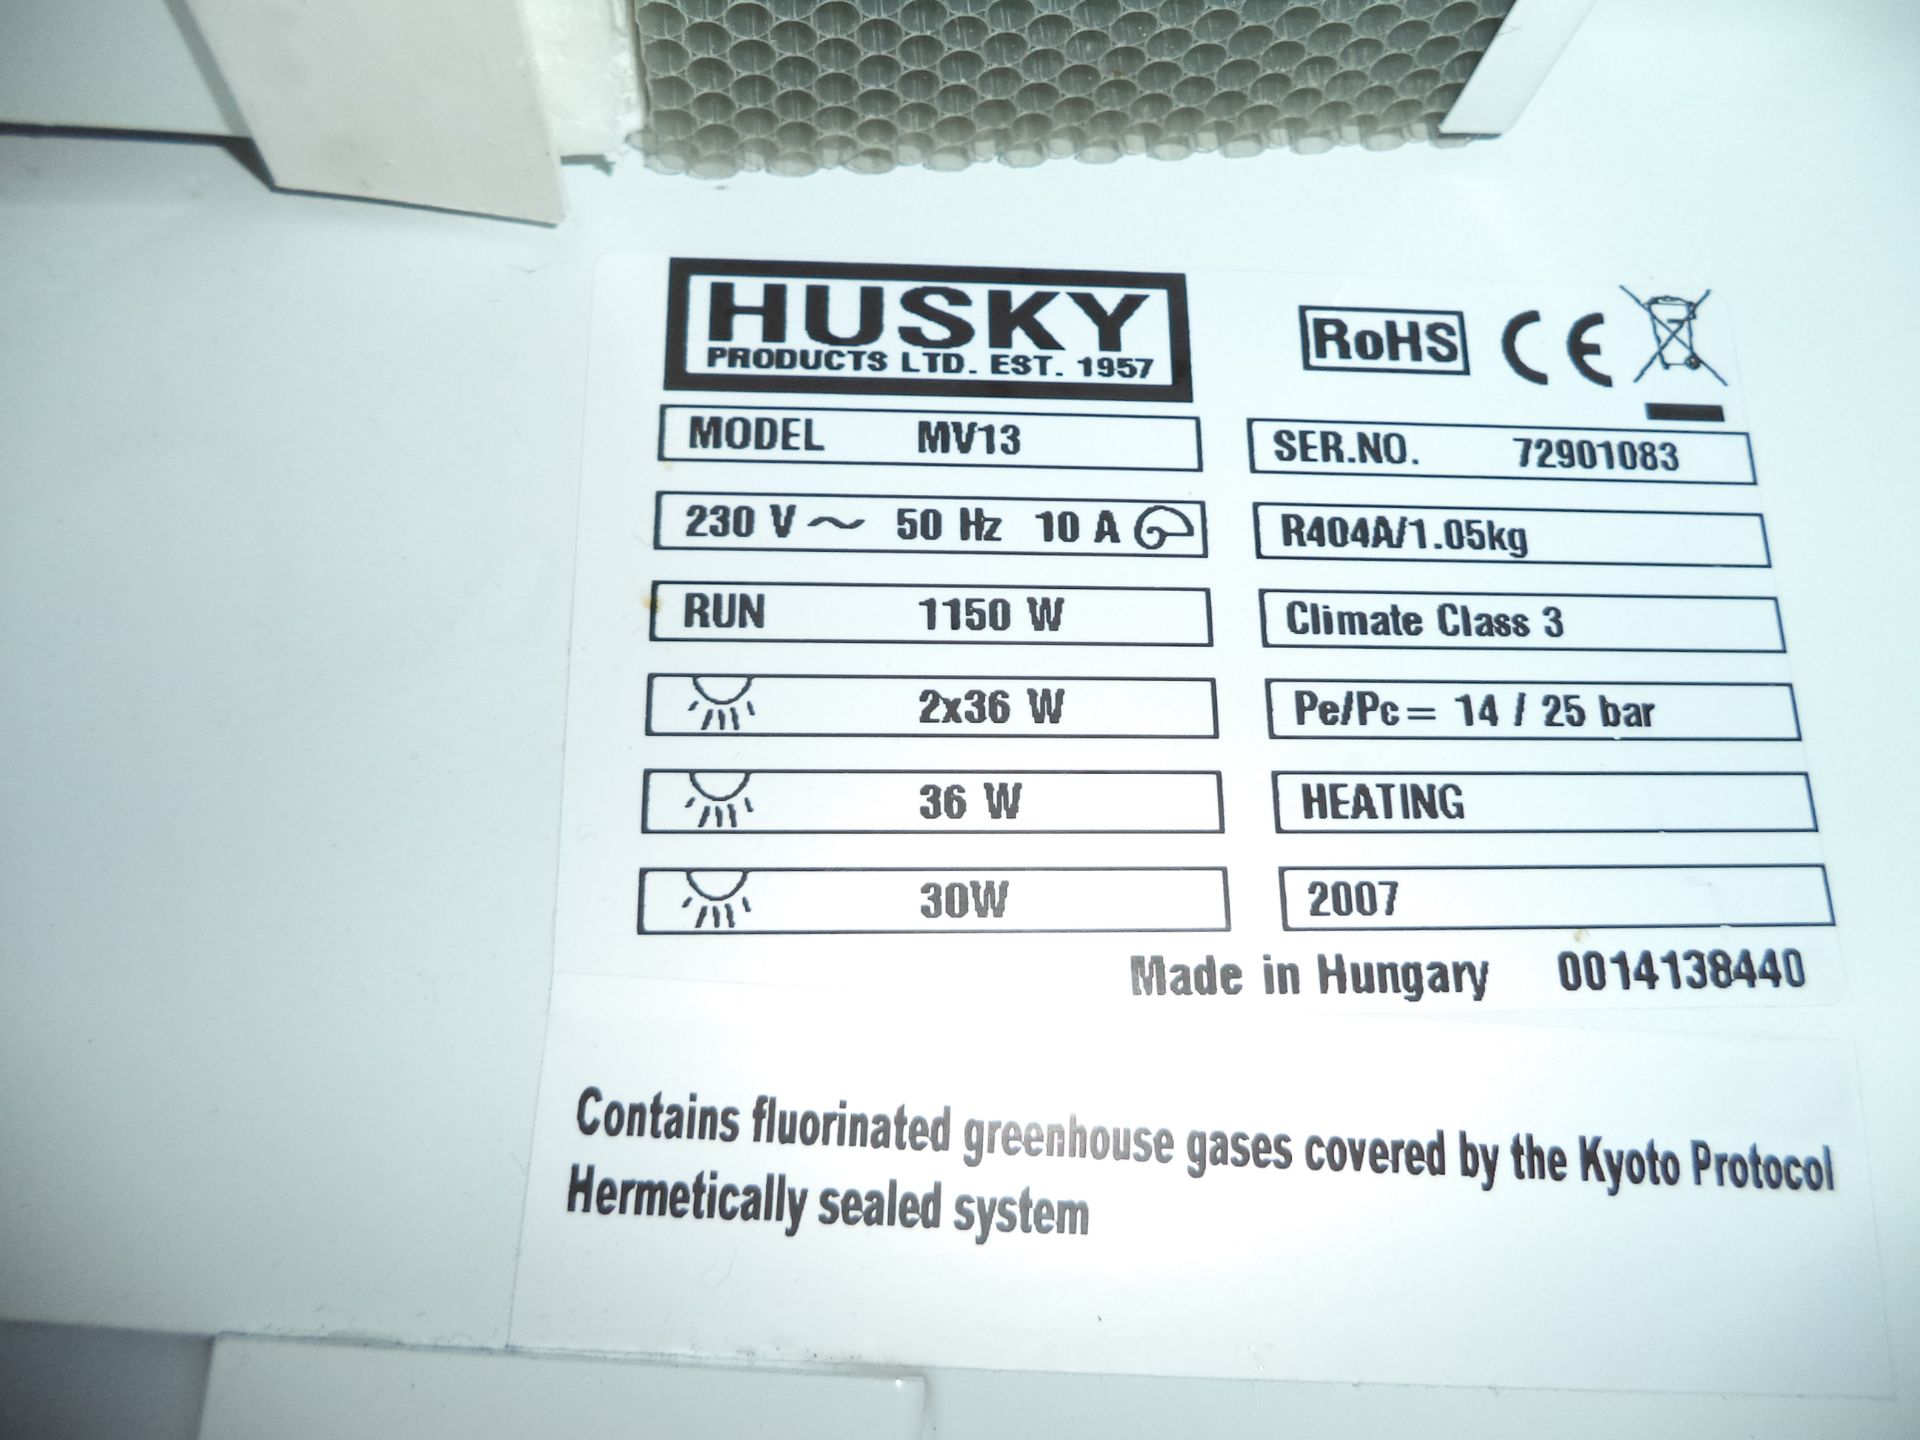 Husky open front chiller model MV13 IMPORTANT: Please remember goods successfully bid upon must be - Image 3 of 3